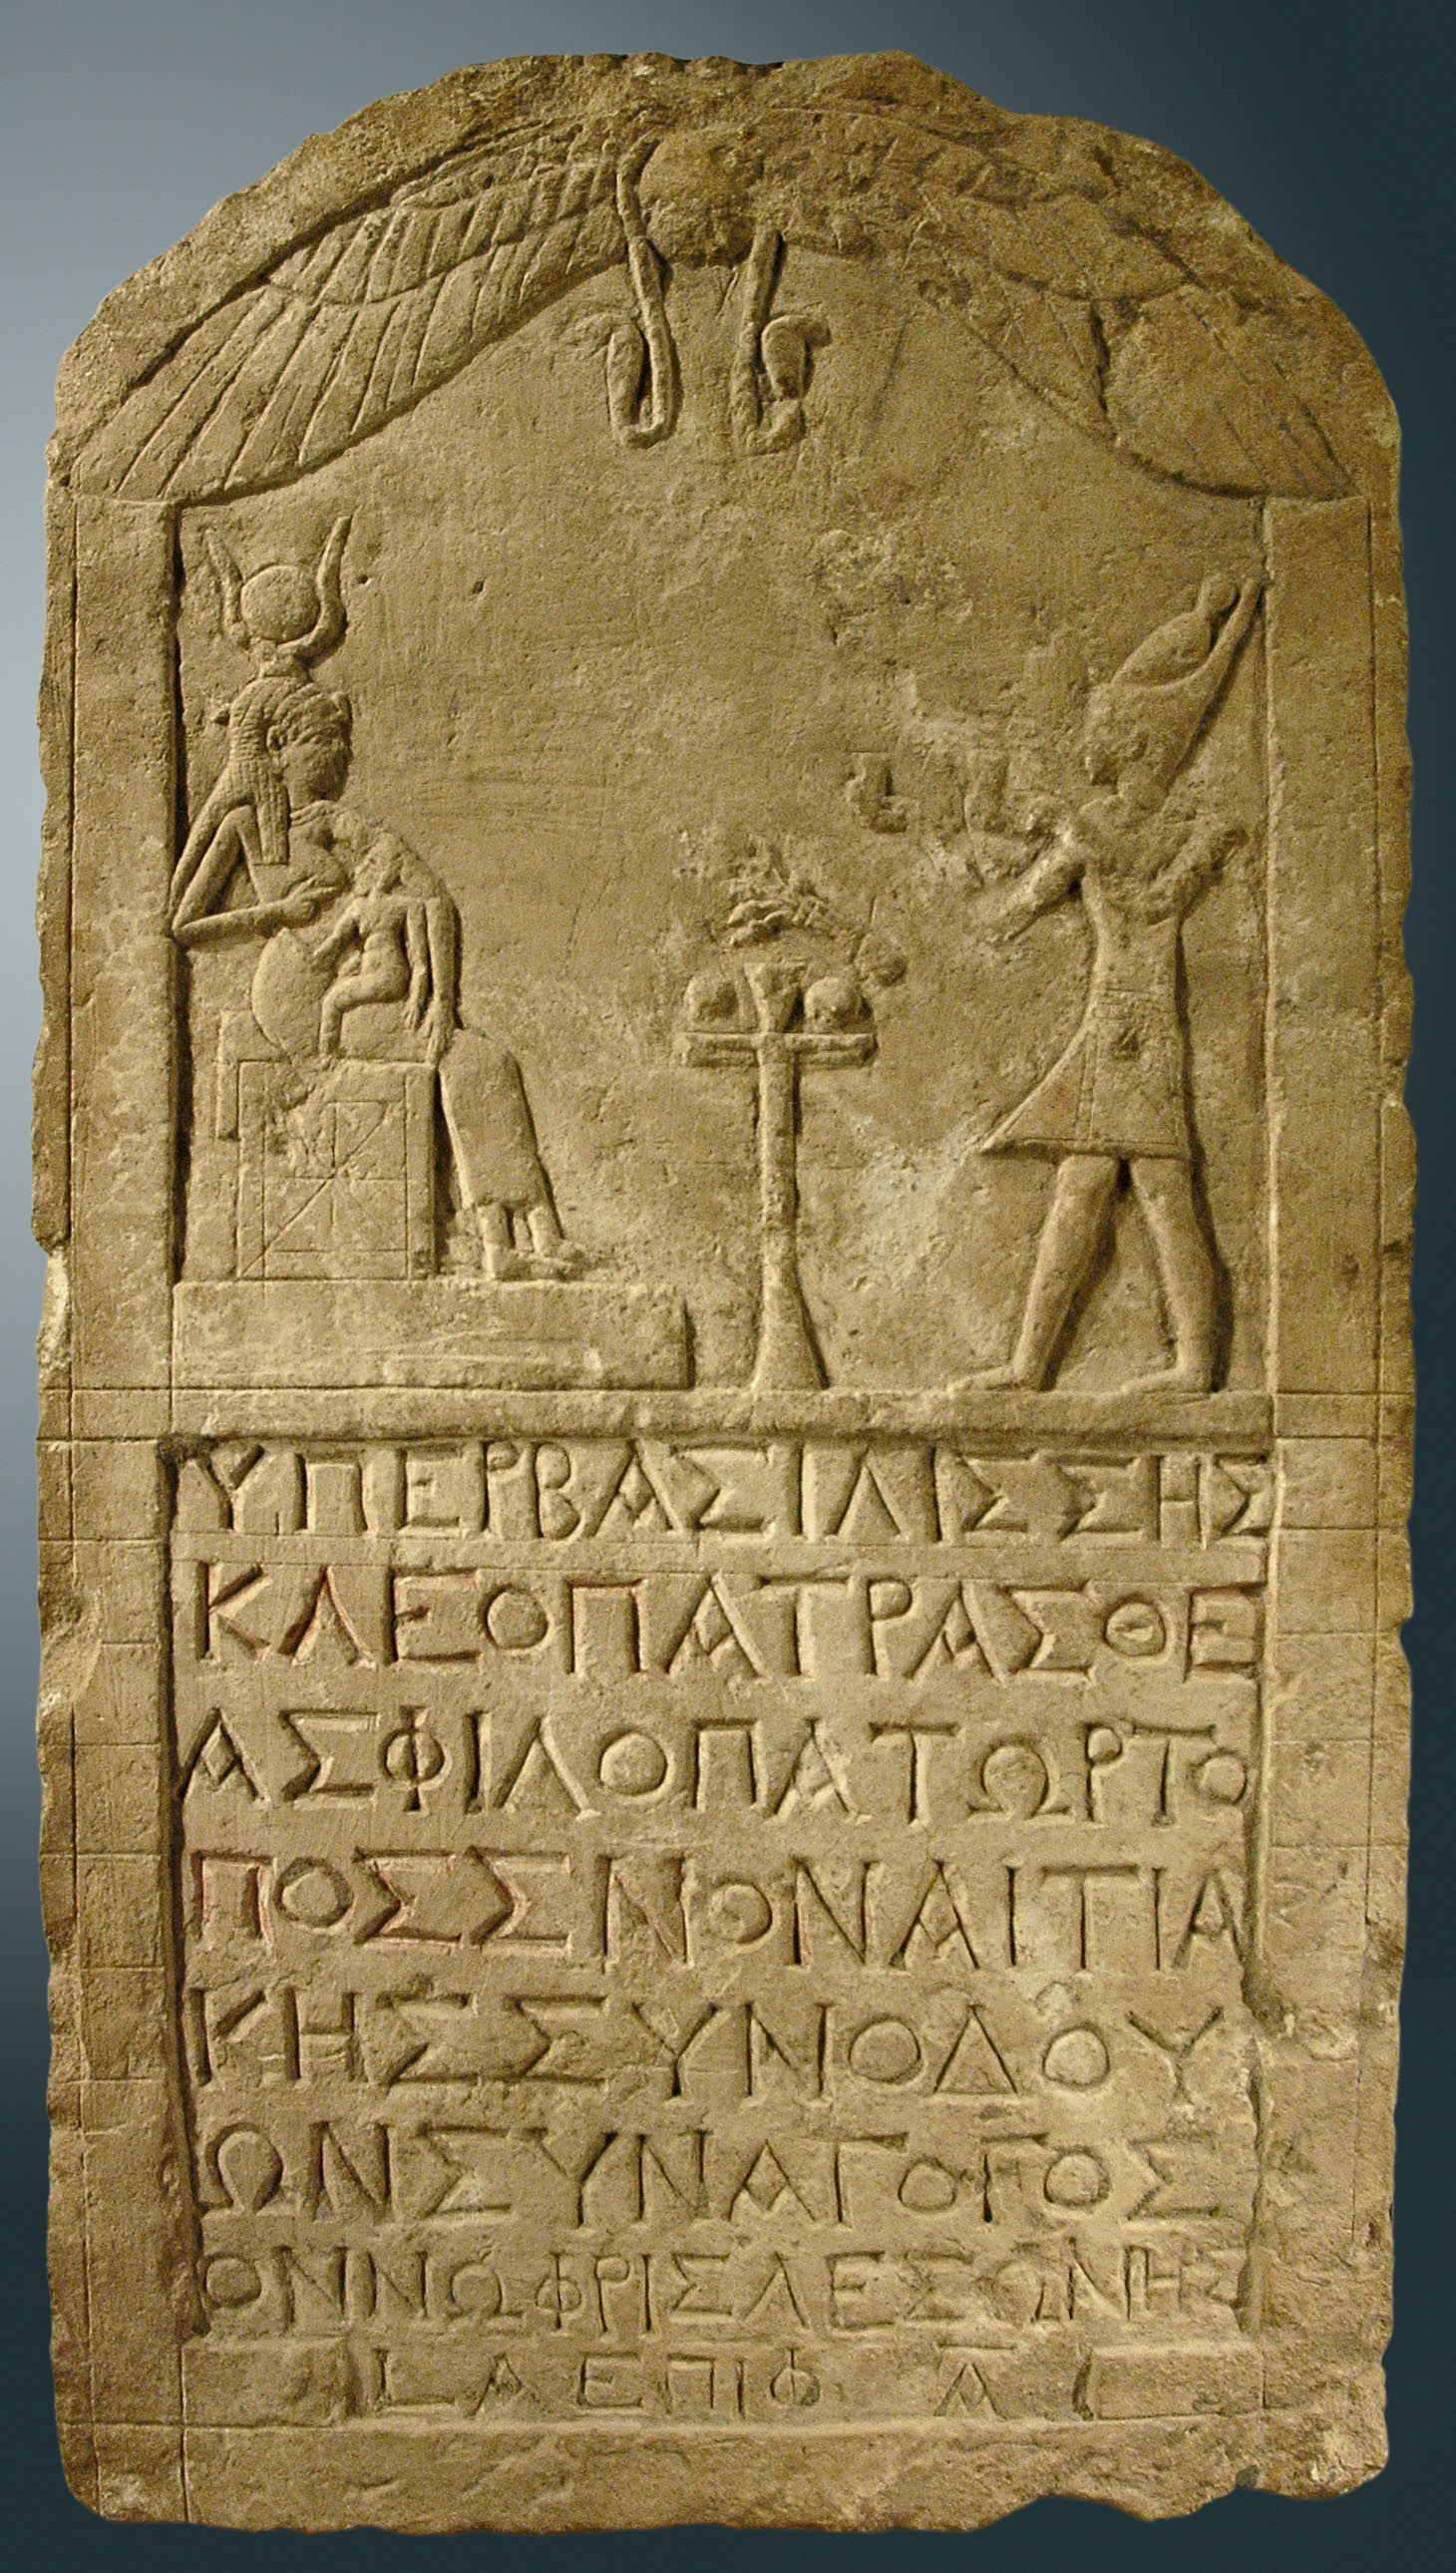 Cleopatra VII of Egypt dressed like a pharaoh presenting offerings to Isis, 51 BCE, limestone stele dedicated by a Greek man named Onnophris, Louvre Museum, Paris.